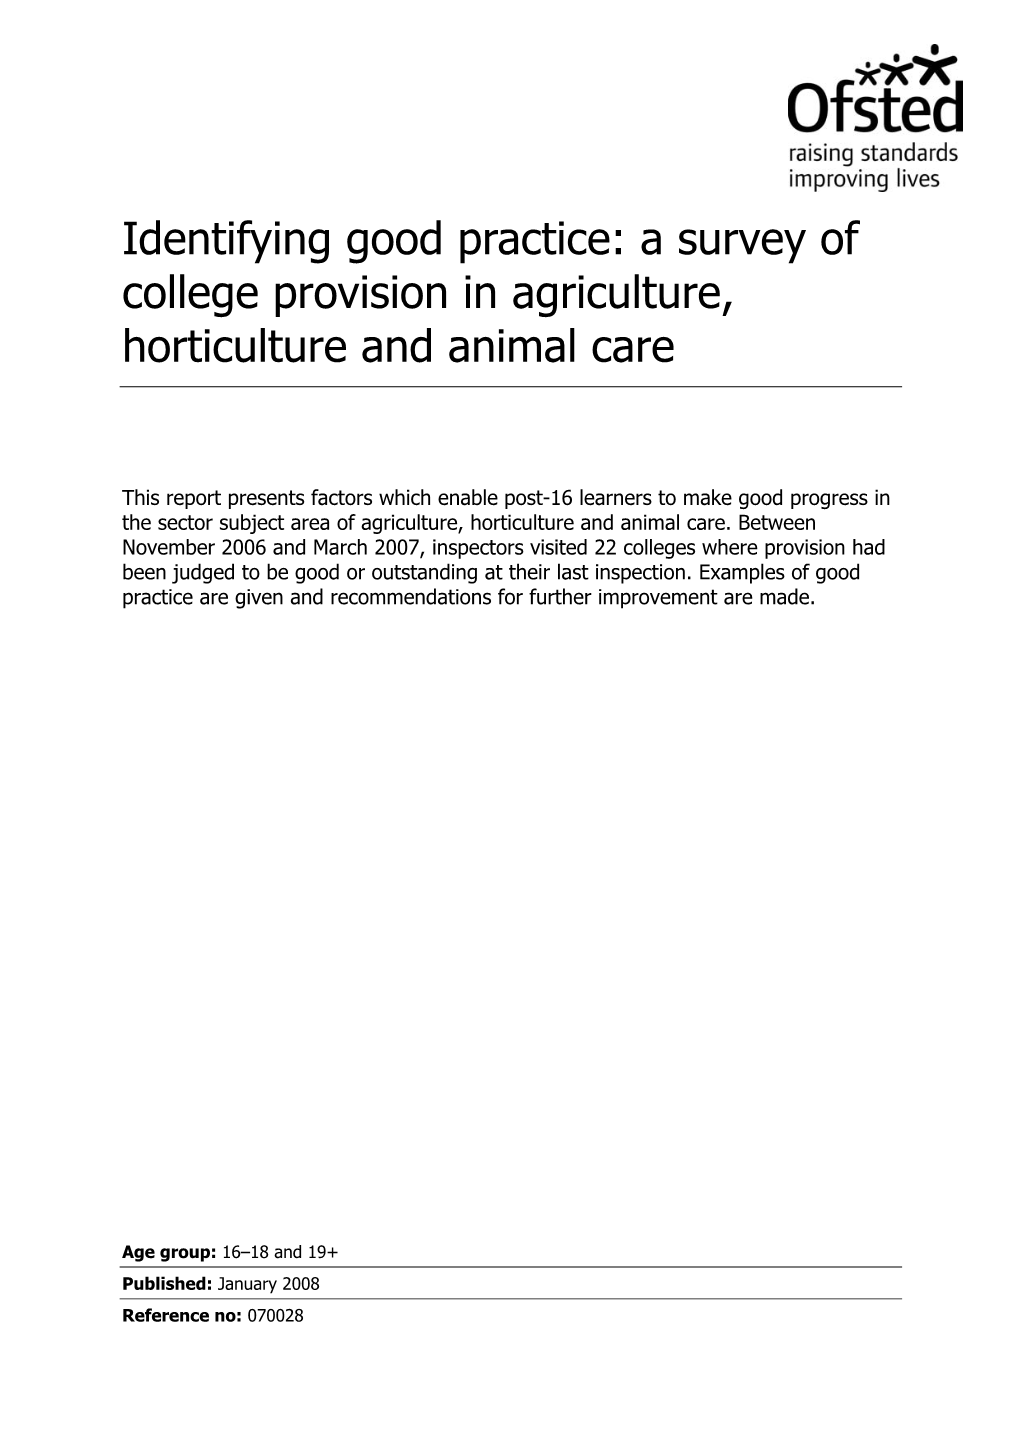 Identifying Good Practice: a Survey of College Provision in Agriculture, Horticulture and Animal Care